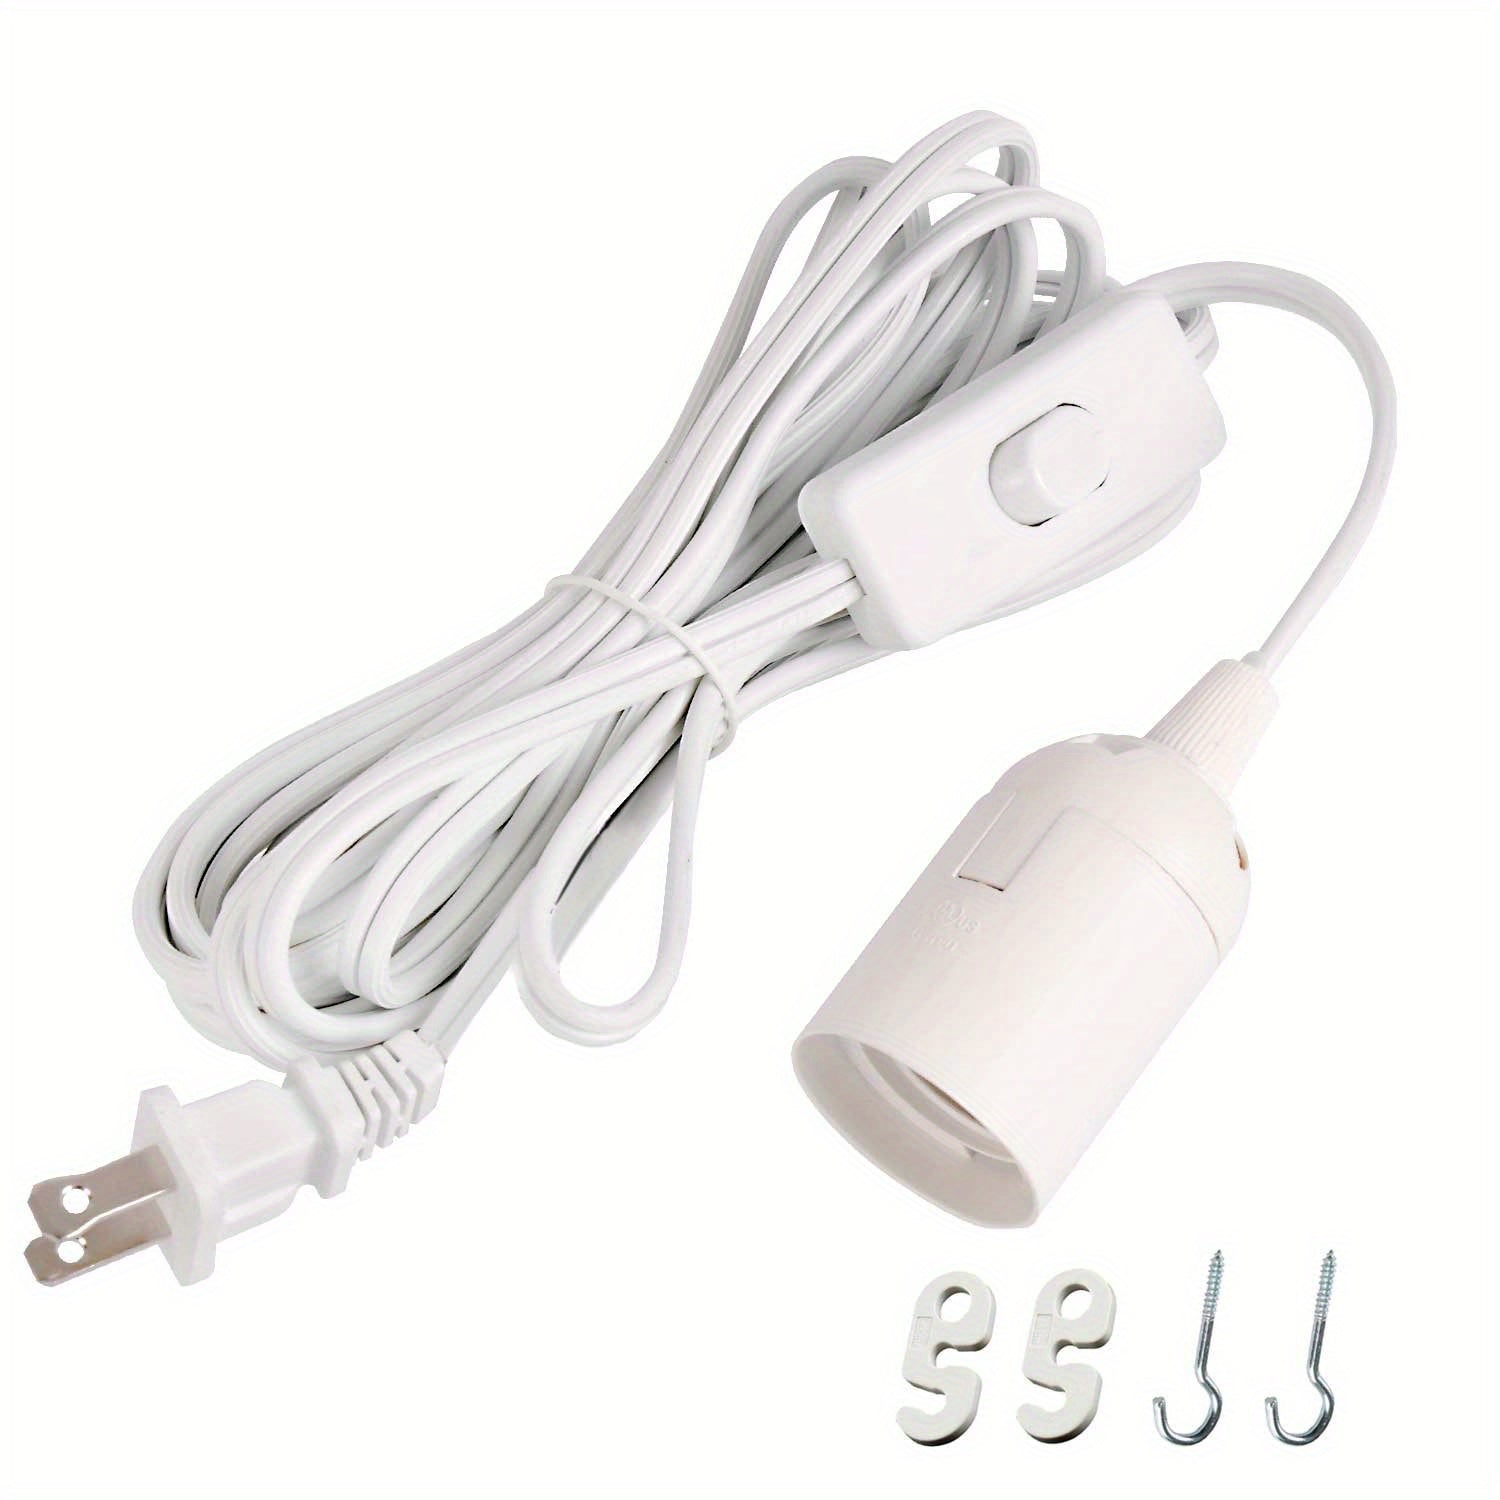 10 Pacck E26/E27 LED Lamp Socket 5.9ft Extension Cord With On/off Switch Without Bulb